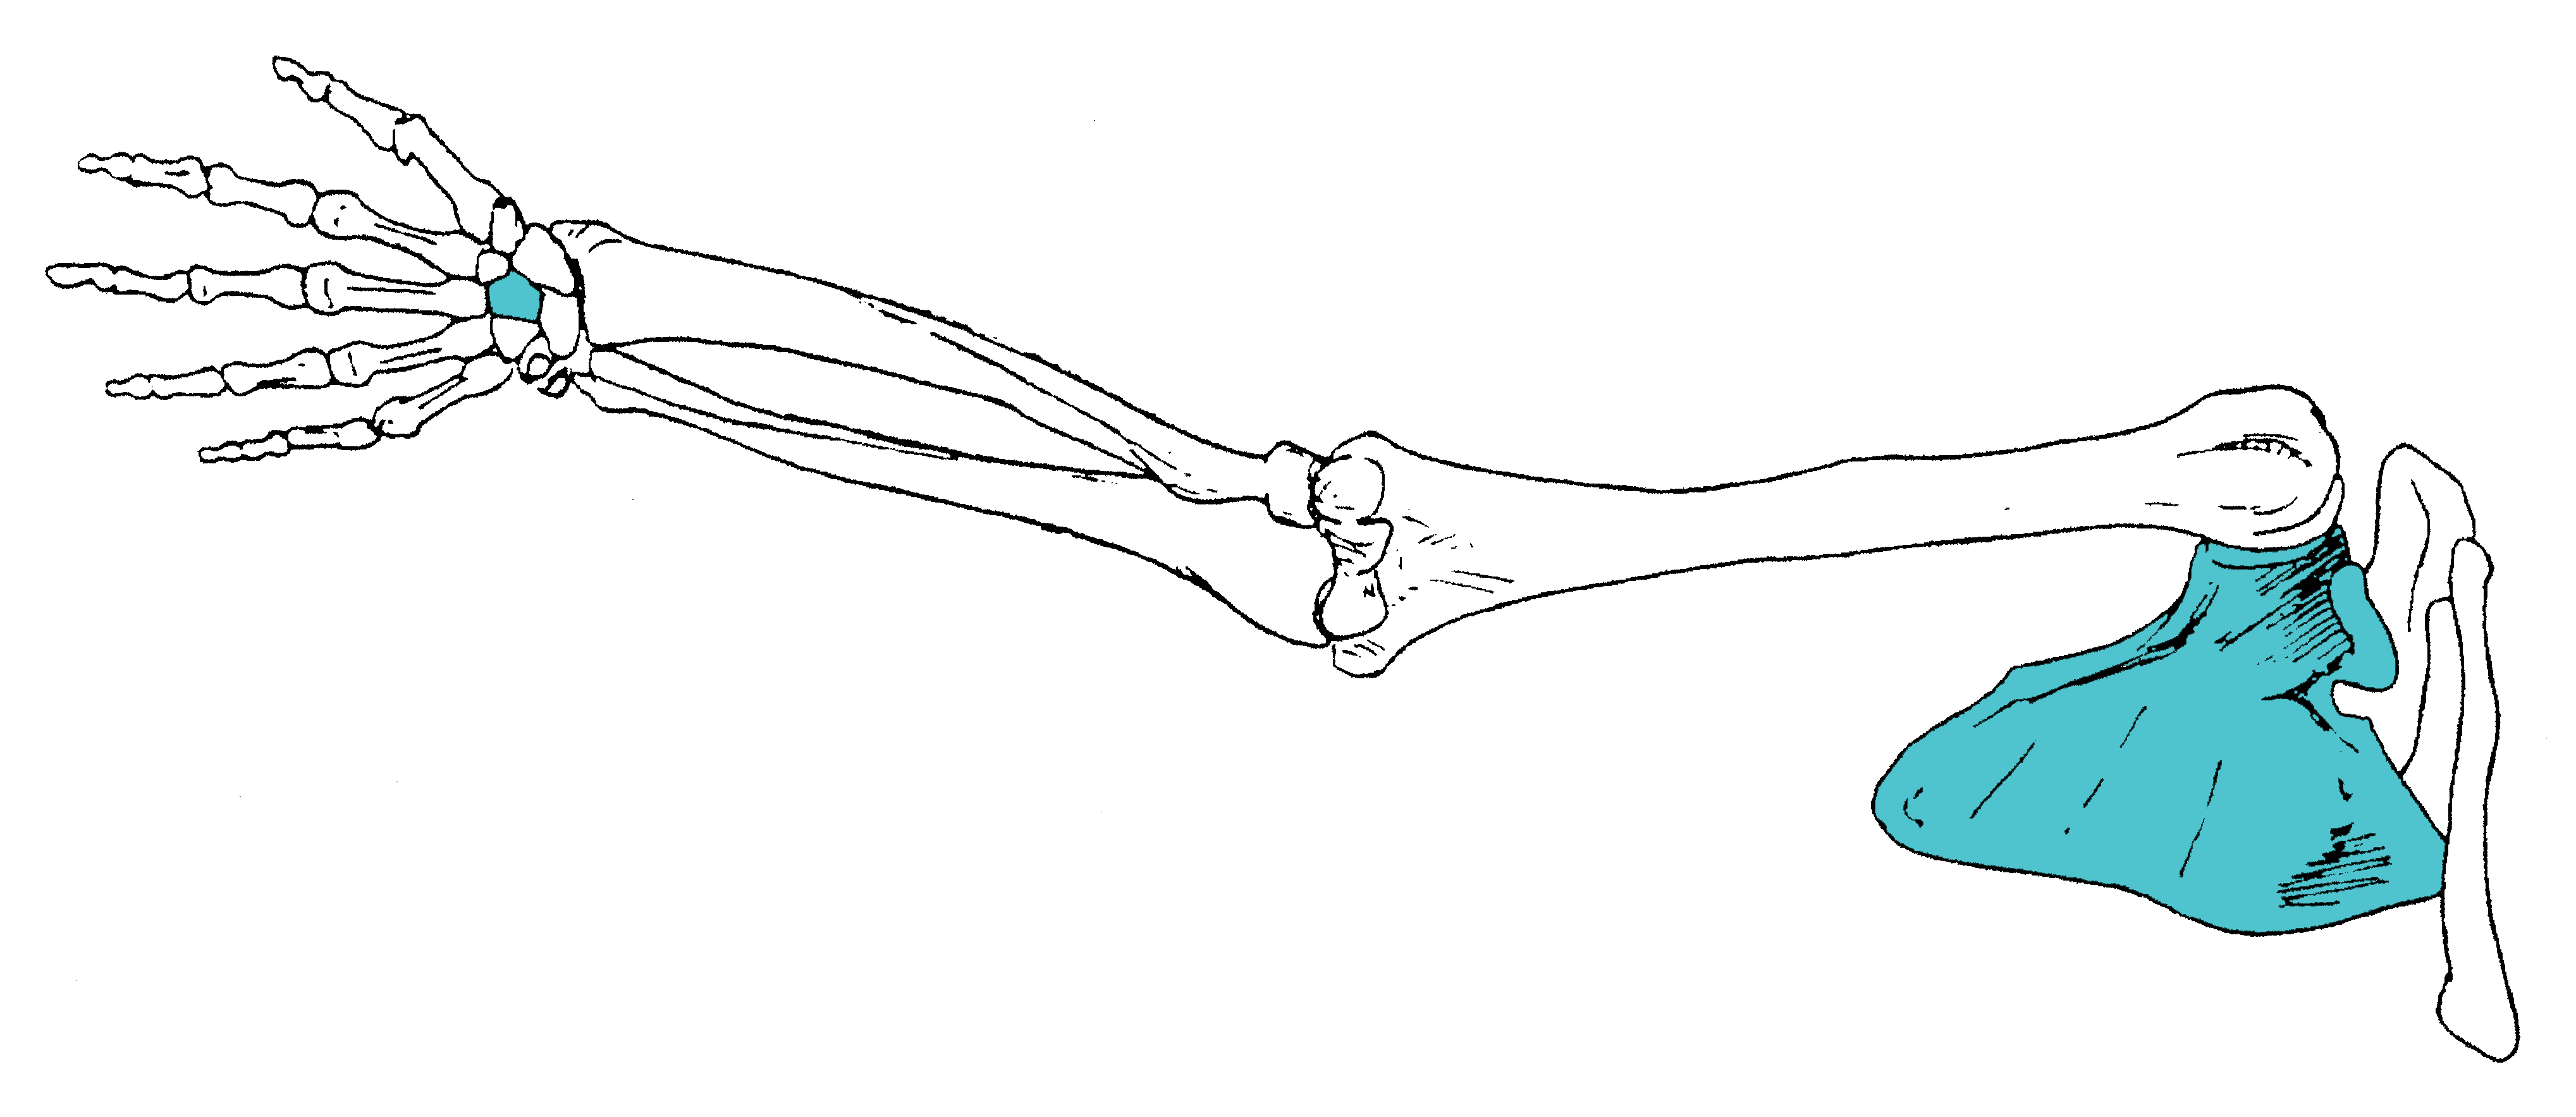 Relationship of the Center of the Scapula and the Center of the Wrist Part 2